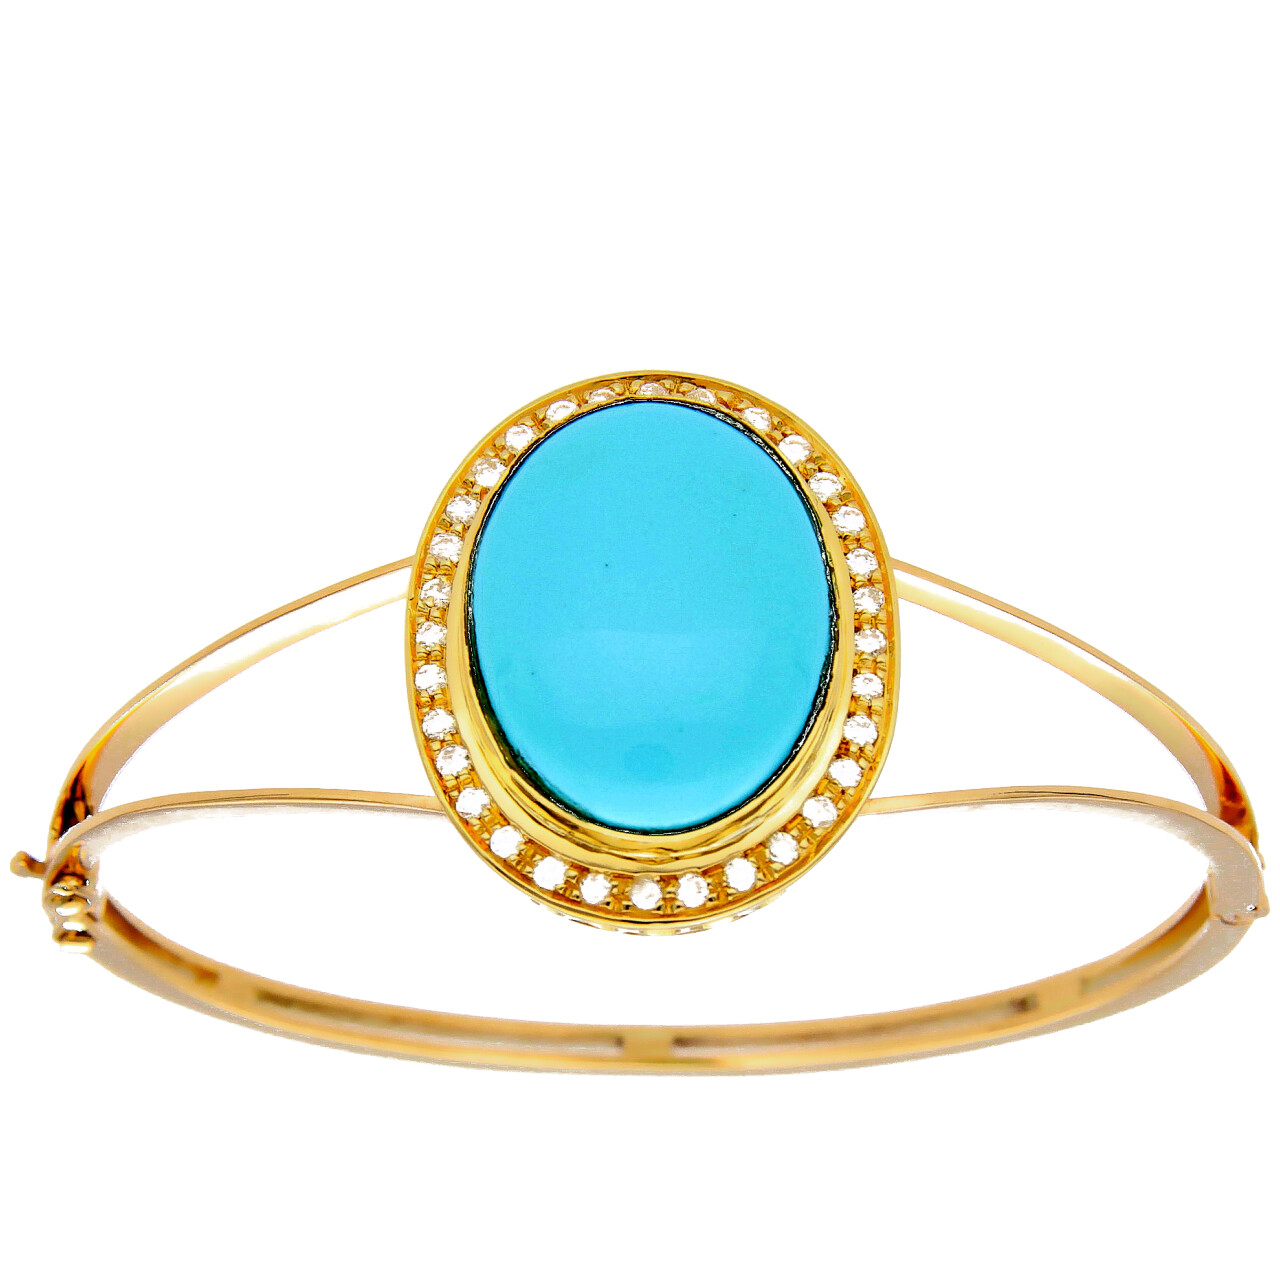 Rigid yellow gold bracelet with turquoise and diamonds ct. 0.96color G Clarity VVS1